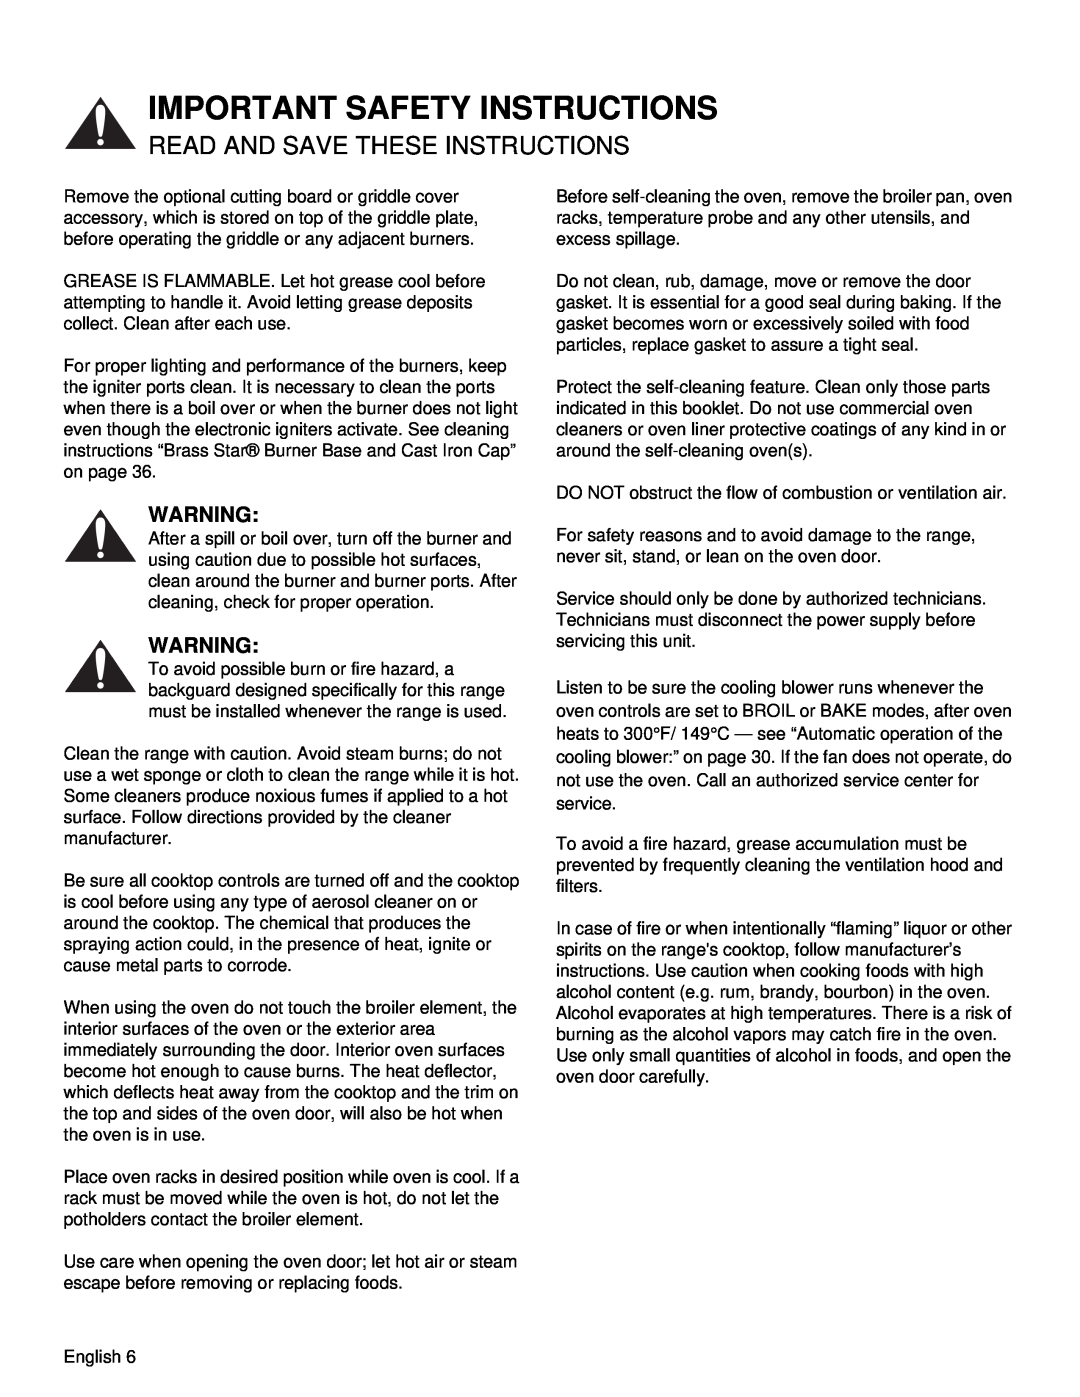 Thermador PRD36, PRD48 manual Important Safety Instructions, Read And Save These Instructions, English 